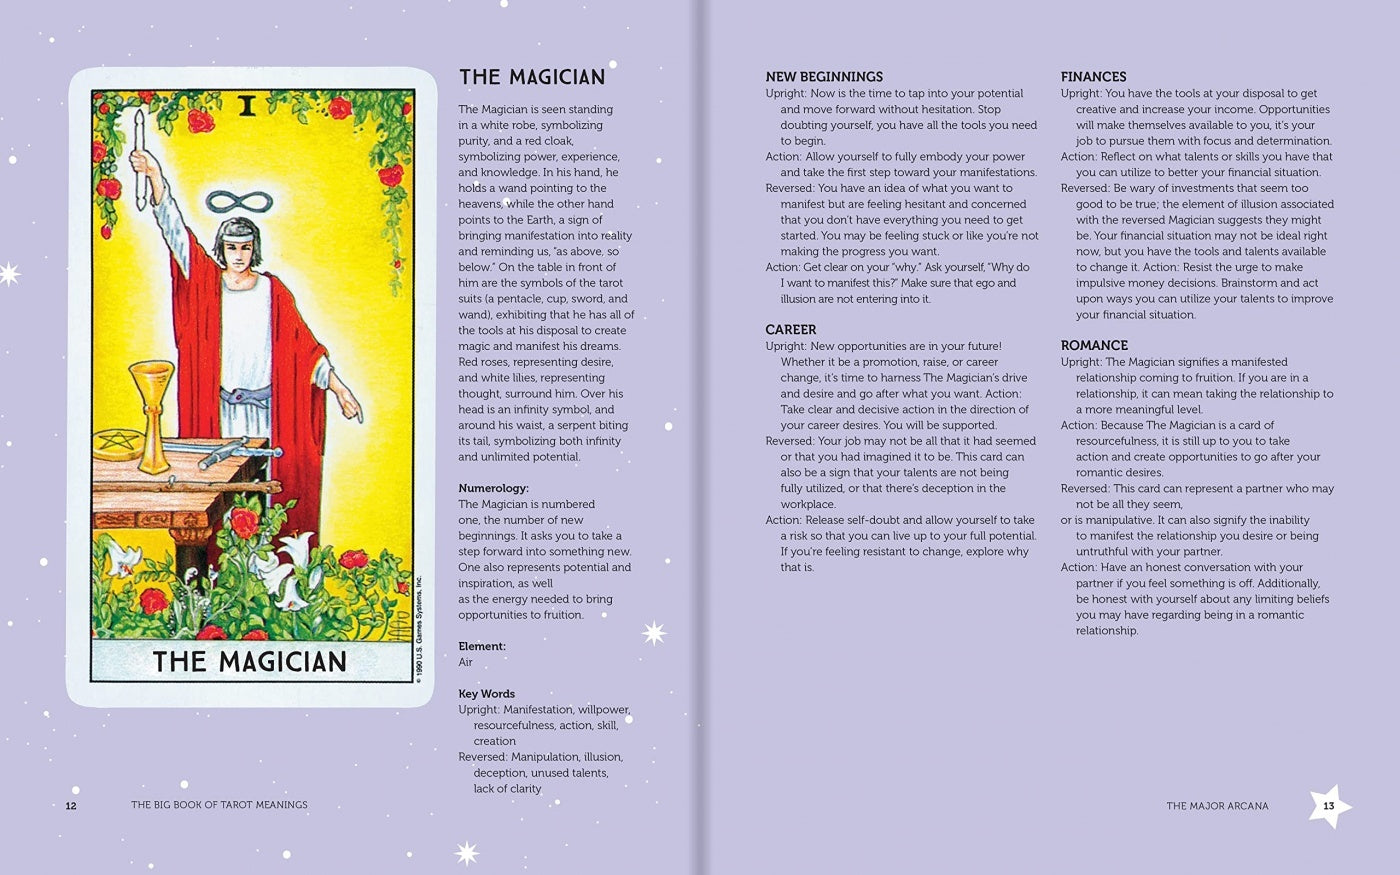 Big Book of Tarot Meanings: The Beginner's Guide to Reading the Cards